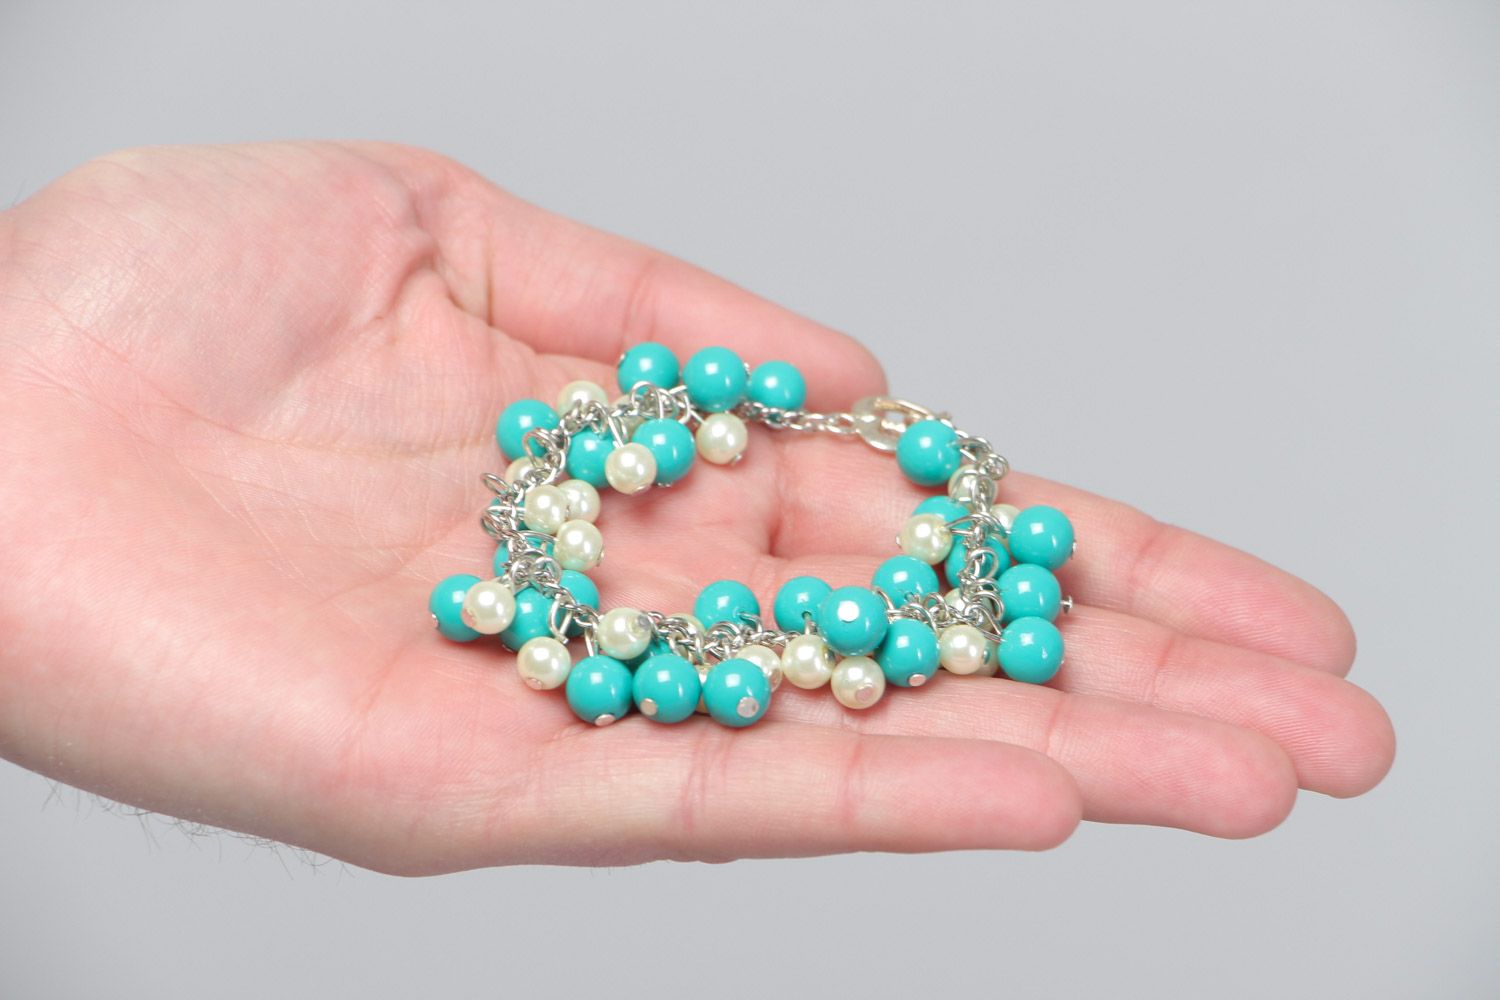 Handmade bright stylish beaded wrist bracelet with charms of turquoise and white colors photo 5